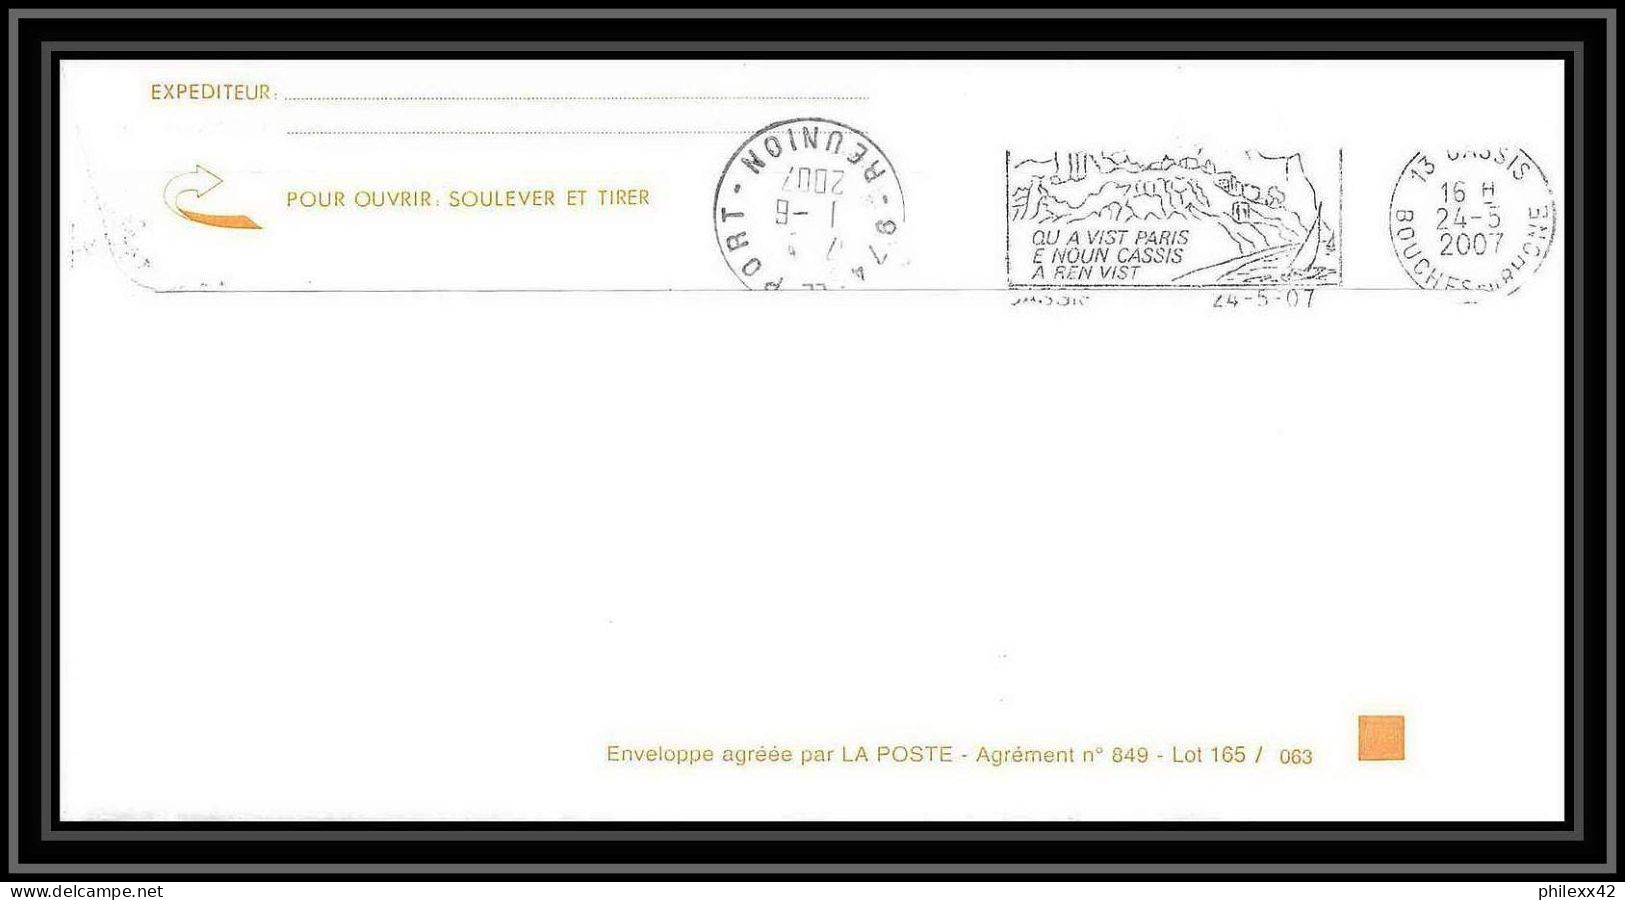 2695 ANTARCTIC Terres Australes TAAF Lettre Cover Dufresne 2 Signé Signed IPEV MADRAS 23/5/2007 N°471 Inde India - Expéditions Antarctiques